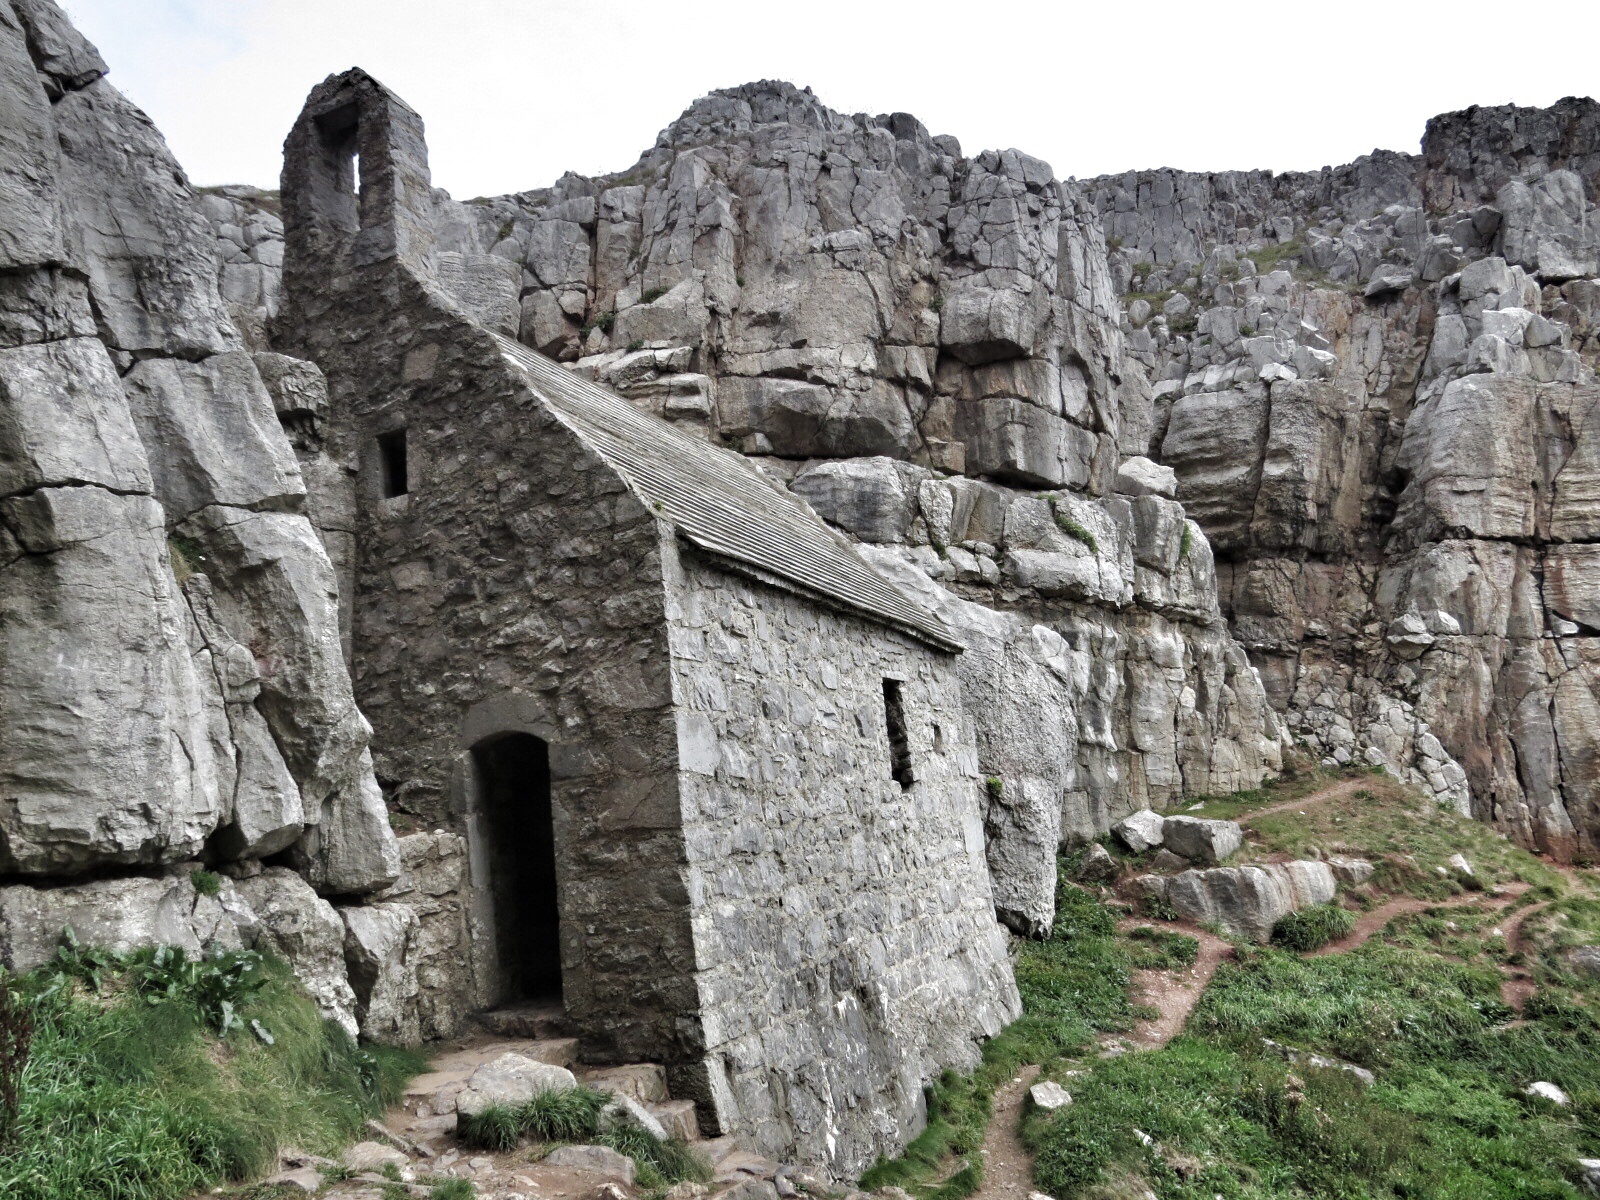 St Govan's Chapel dates from medieval times and is only accessible down a flight of stone steps.